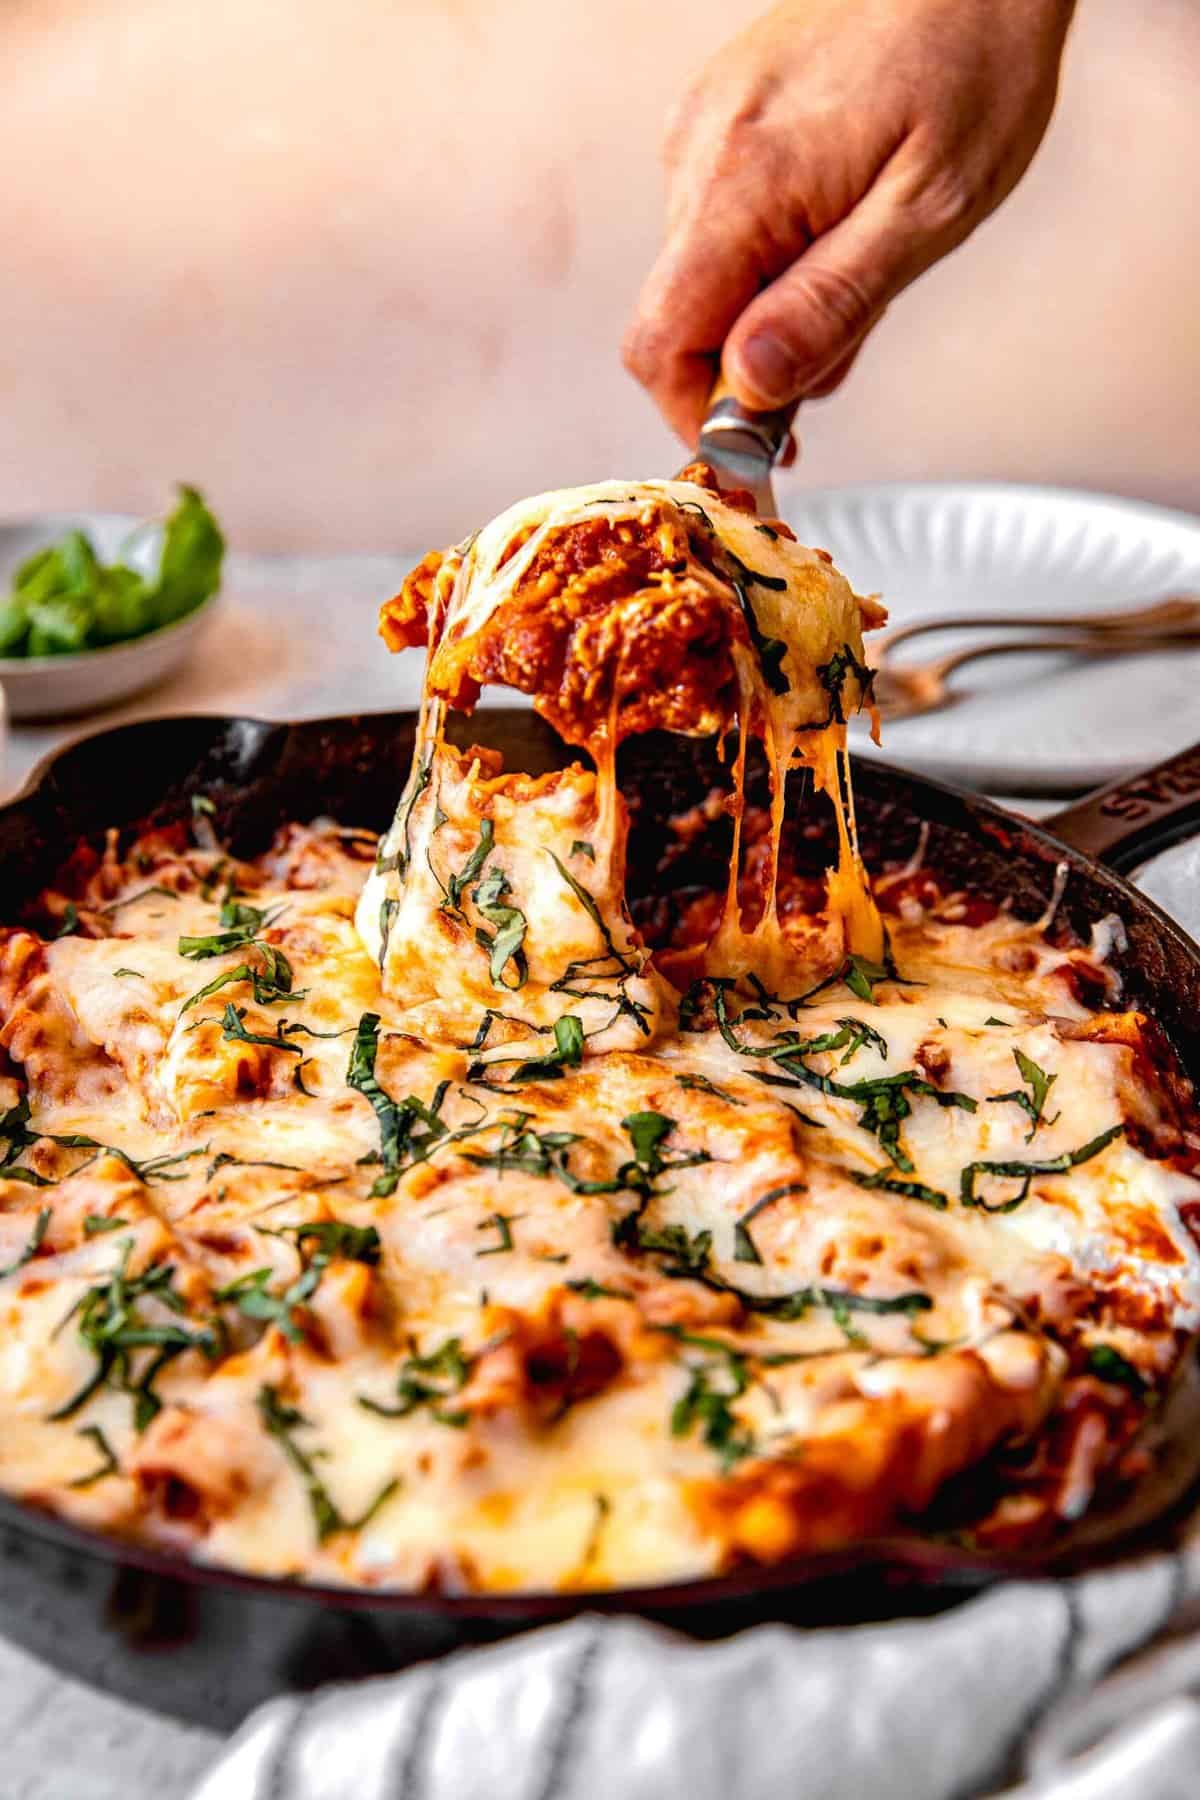 Scooping a serving of skillet lasagna out of the pan.